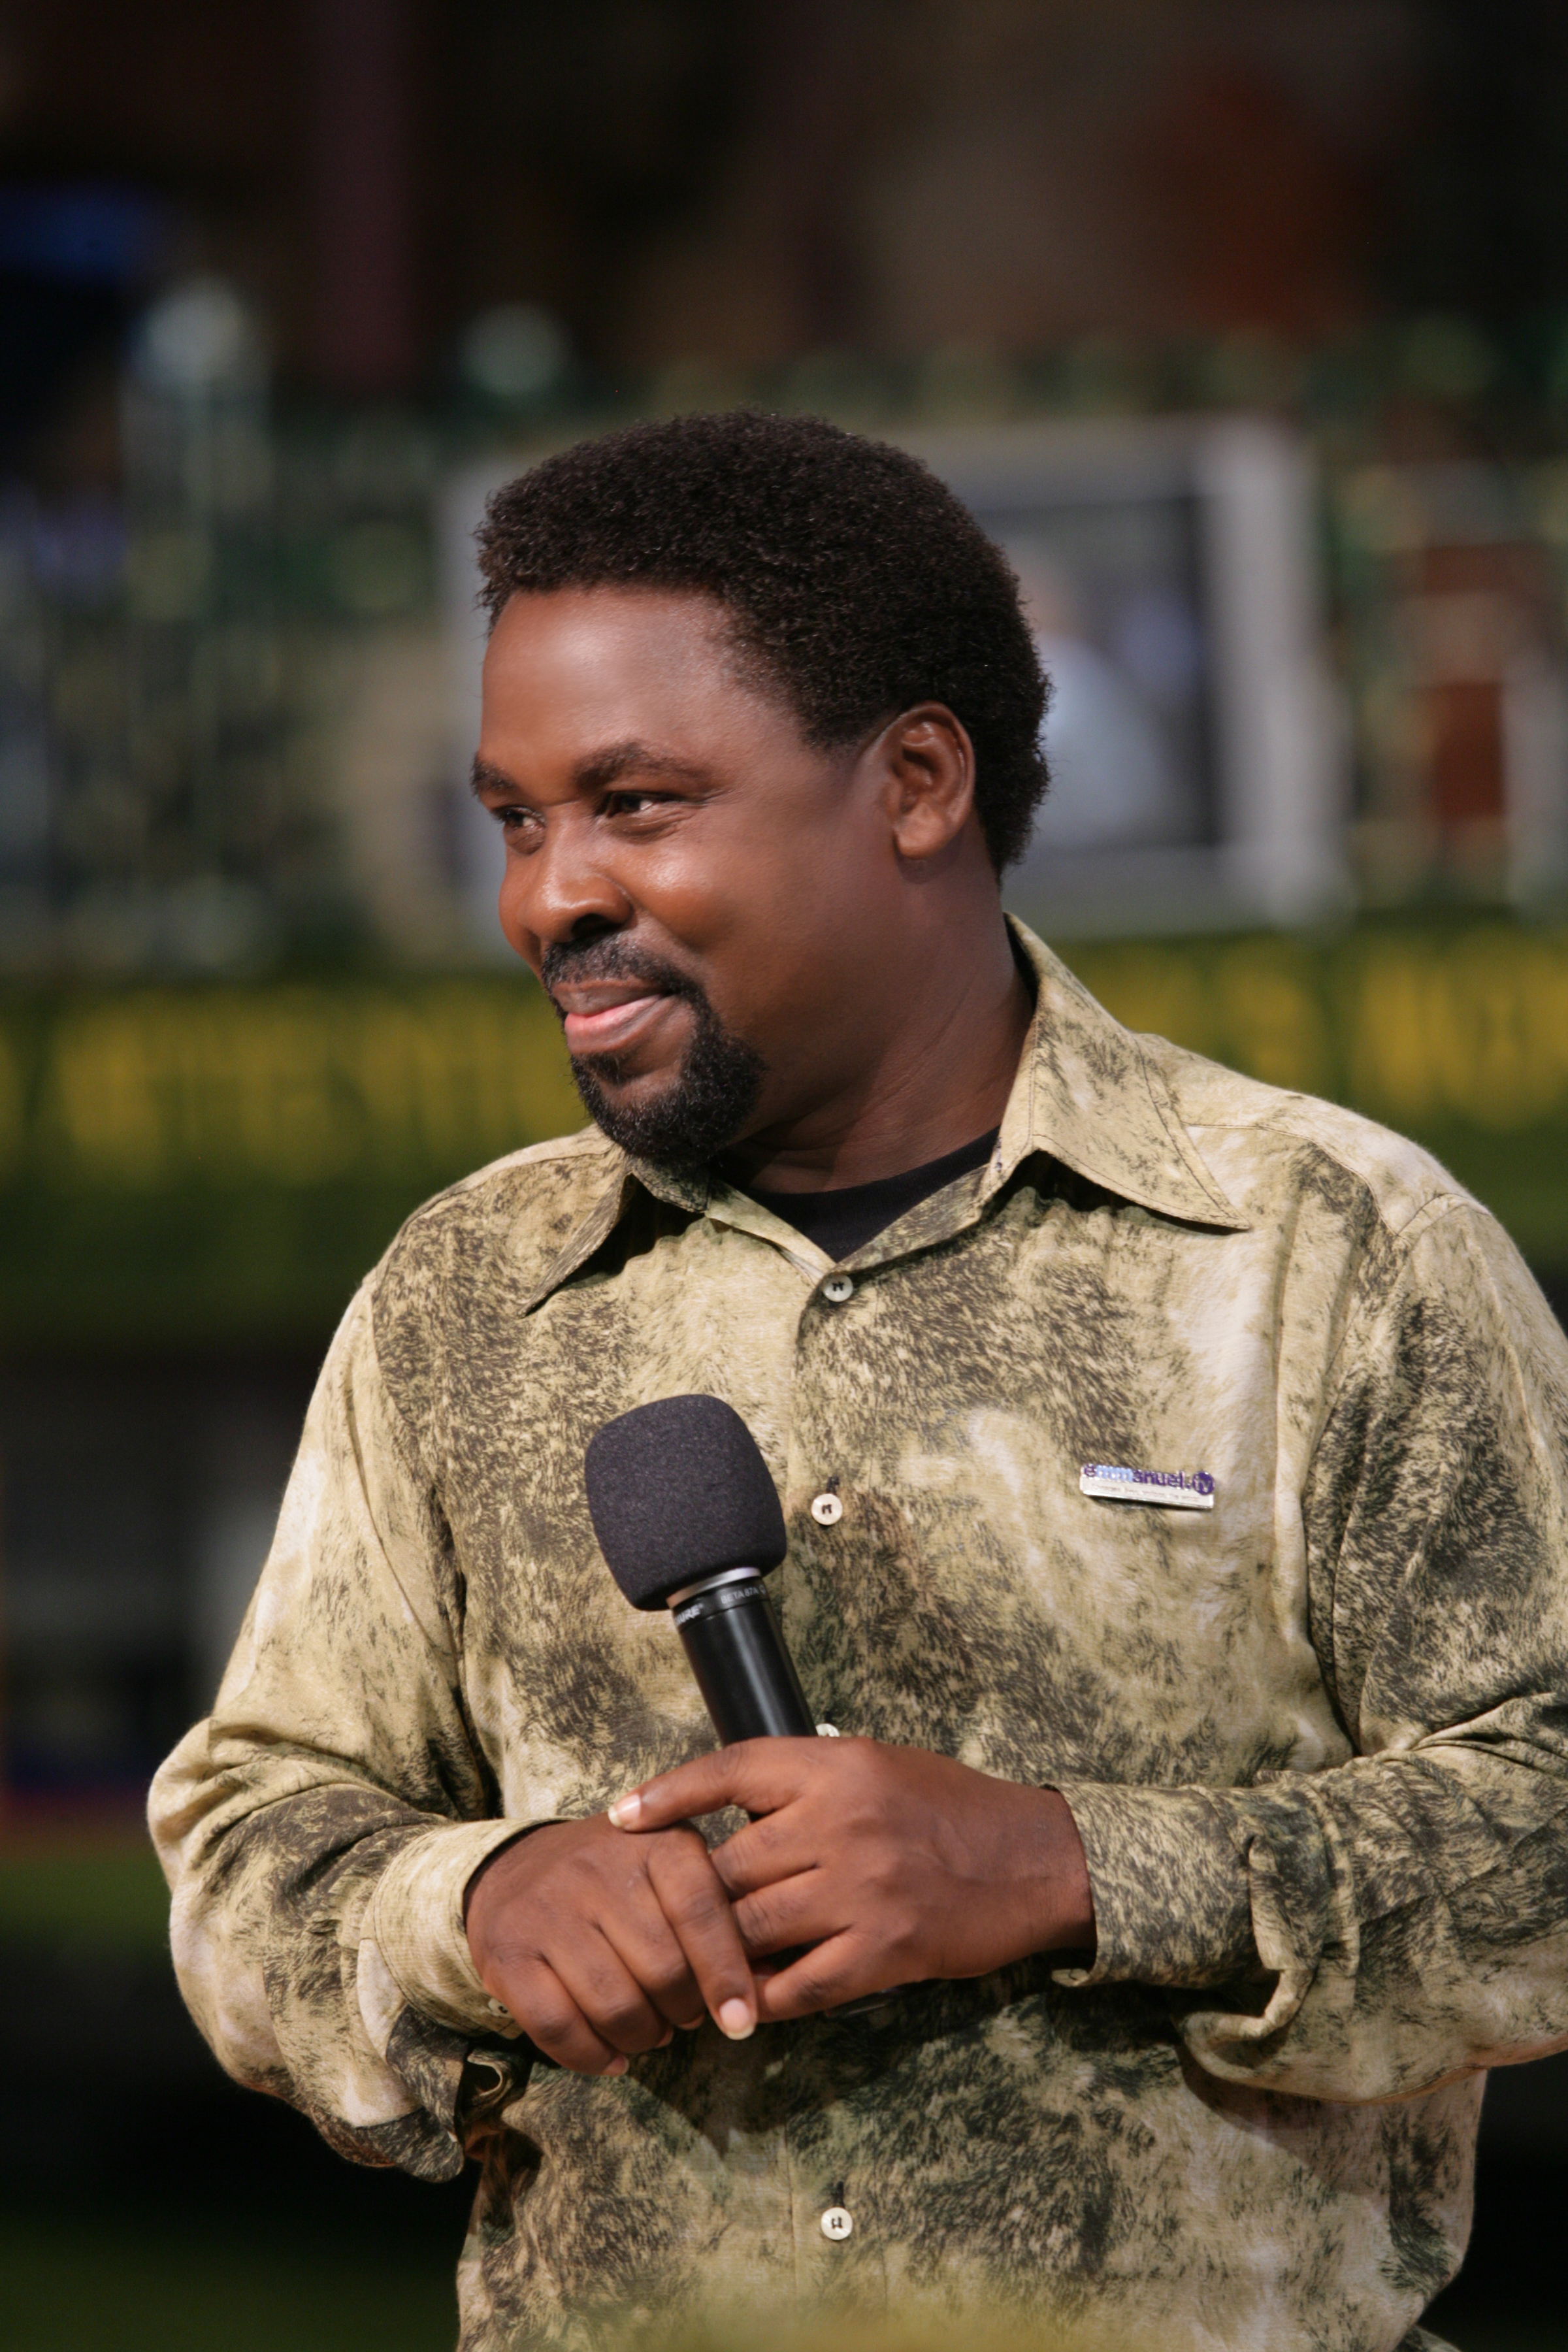 Prophet TB Joshua - One Life For Christ Is All I Have, One Life For Christ Is So Dear